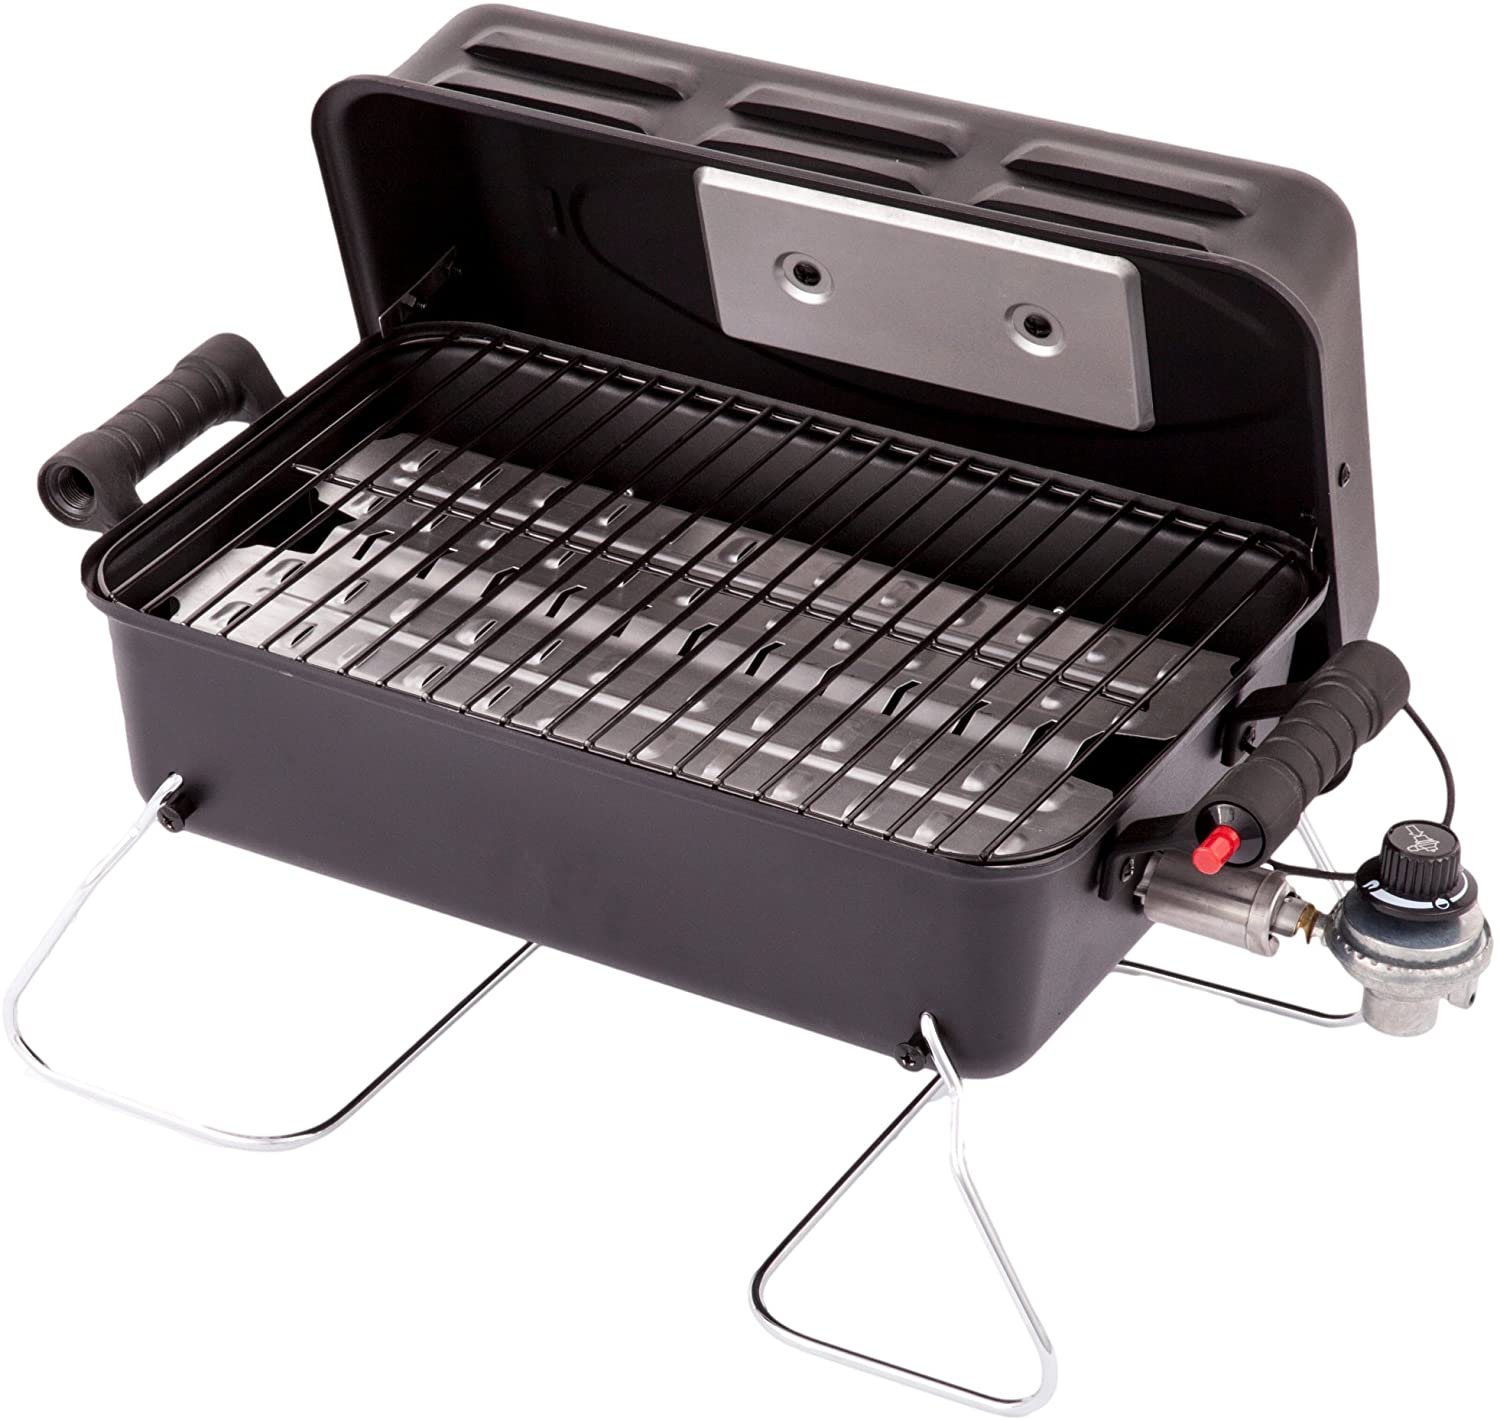 Char-Broil Deluxe Portable Gas Grill